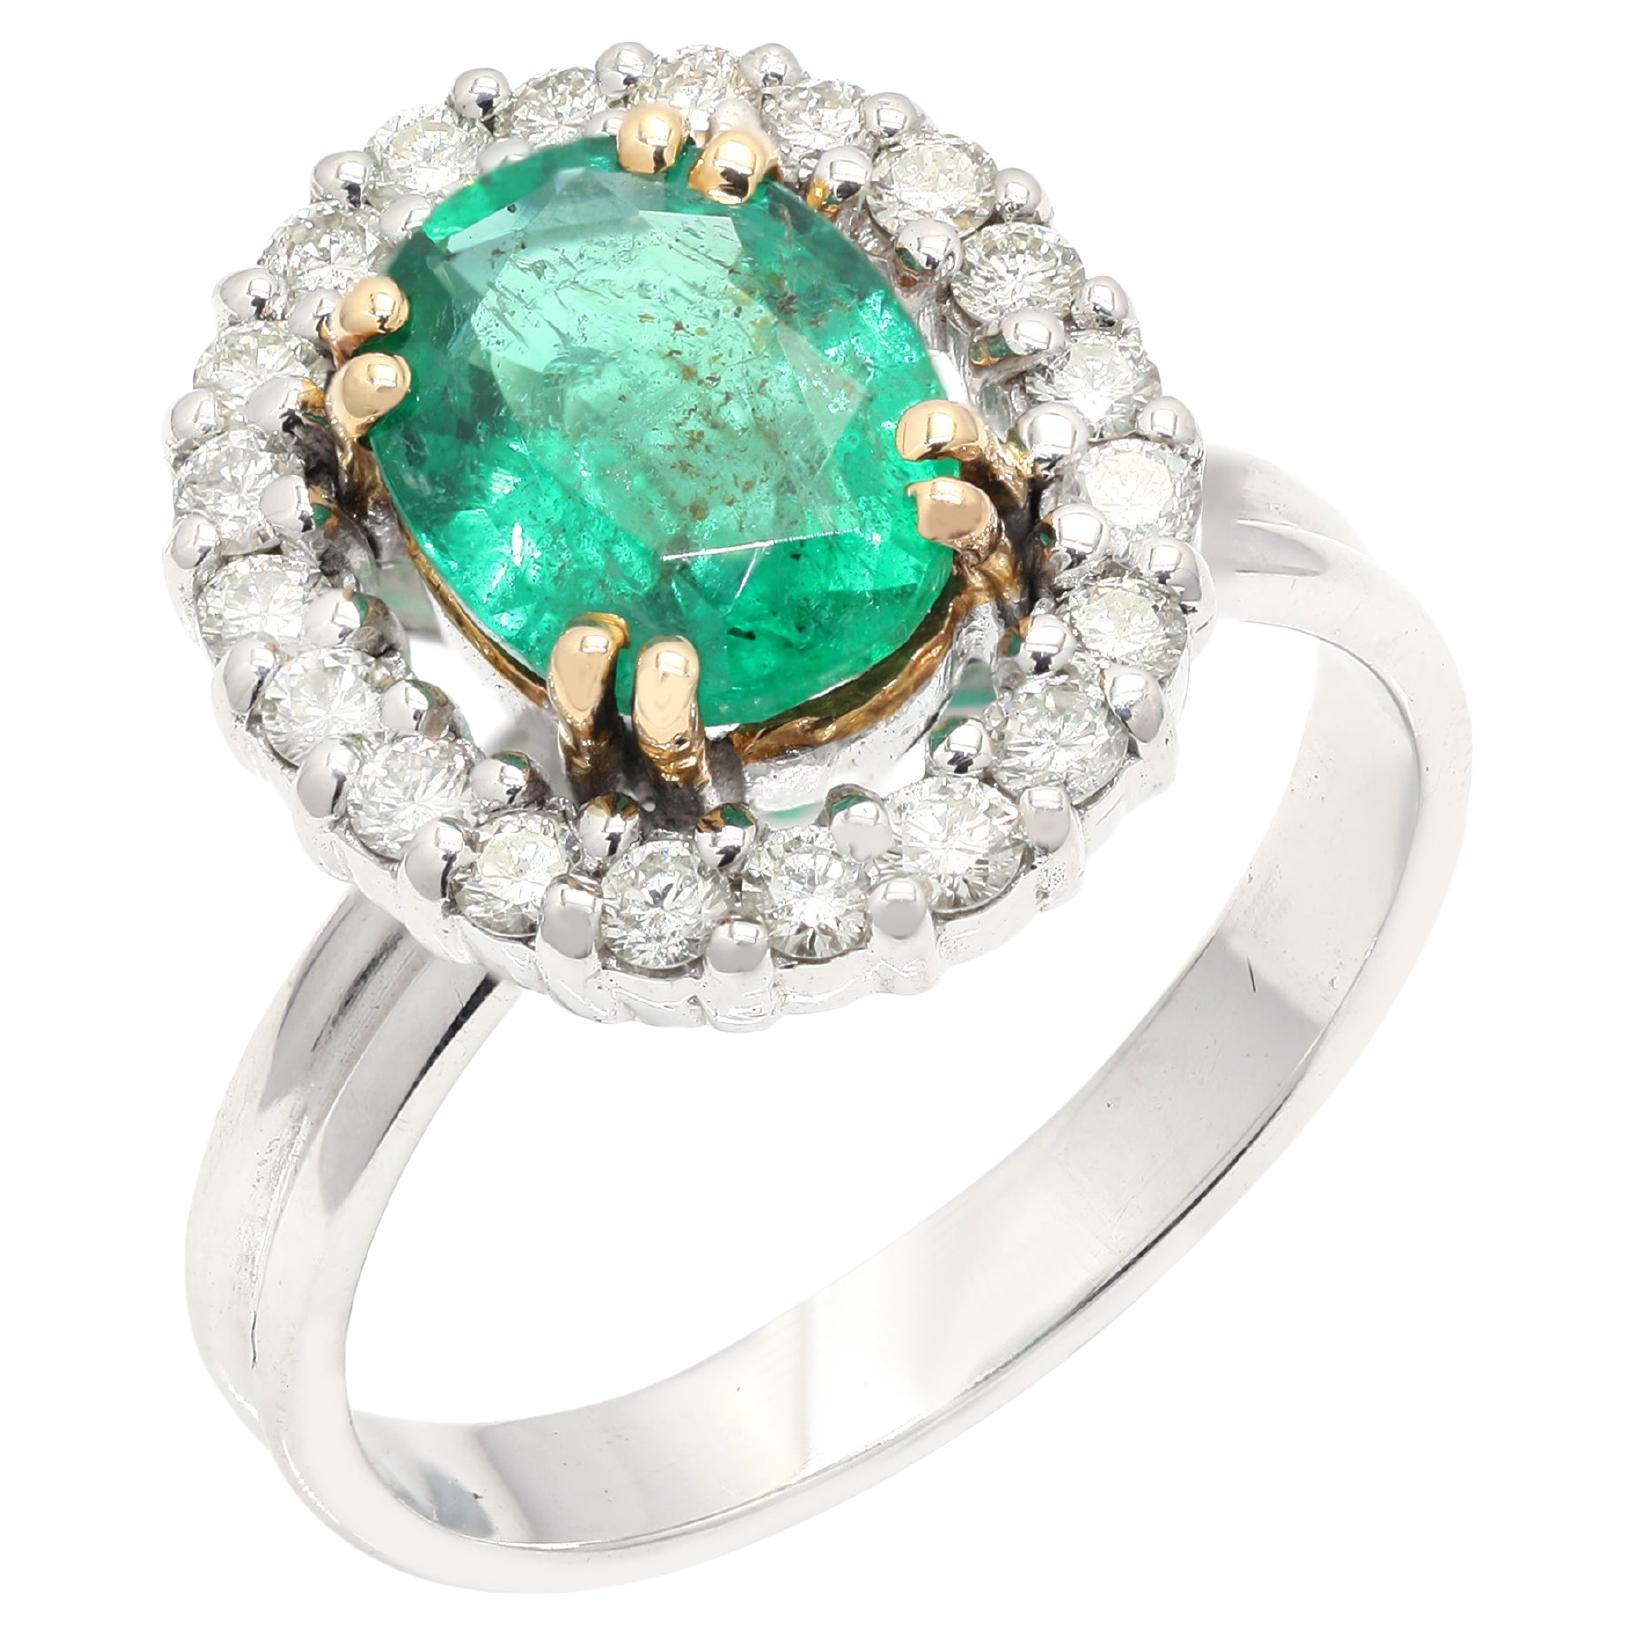 For Sale:  Genuine Diamond and Emerald Wedding Ring Embedded in 18K White Gold